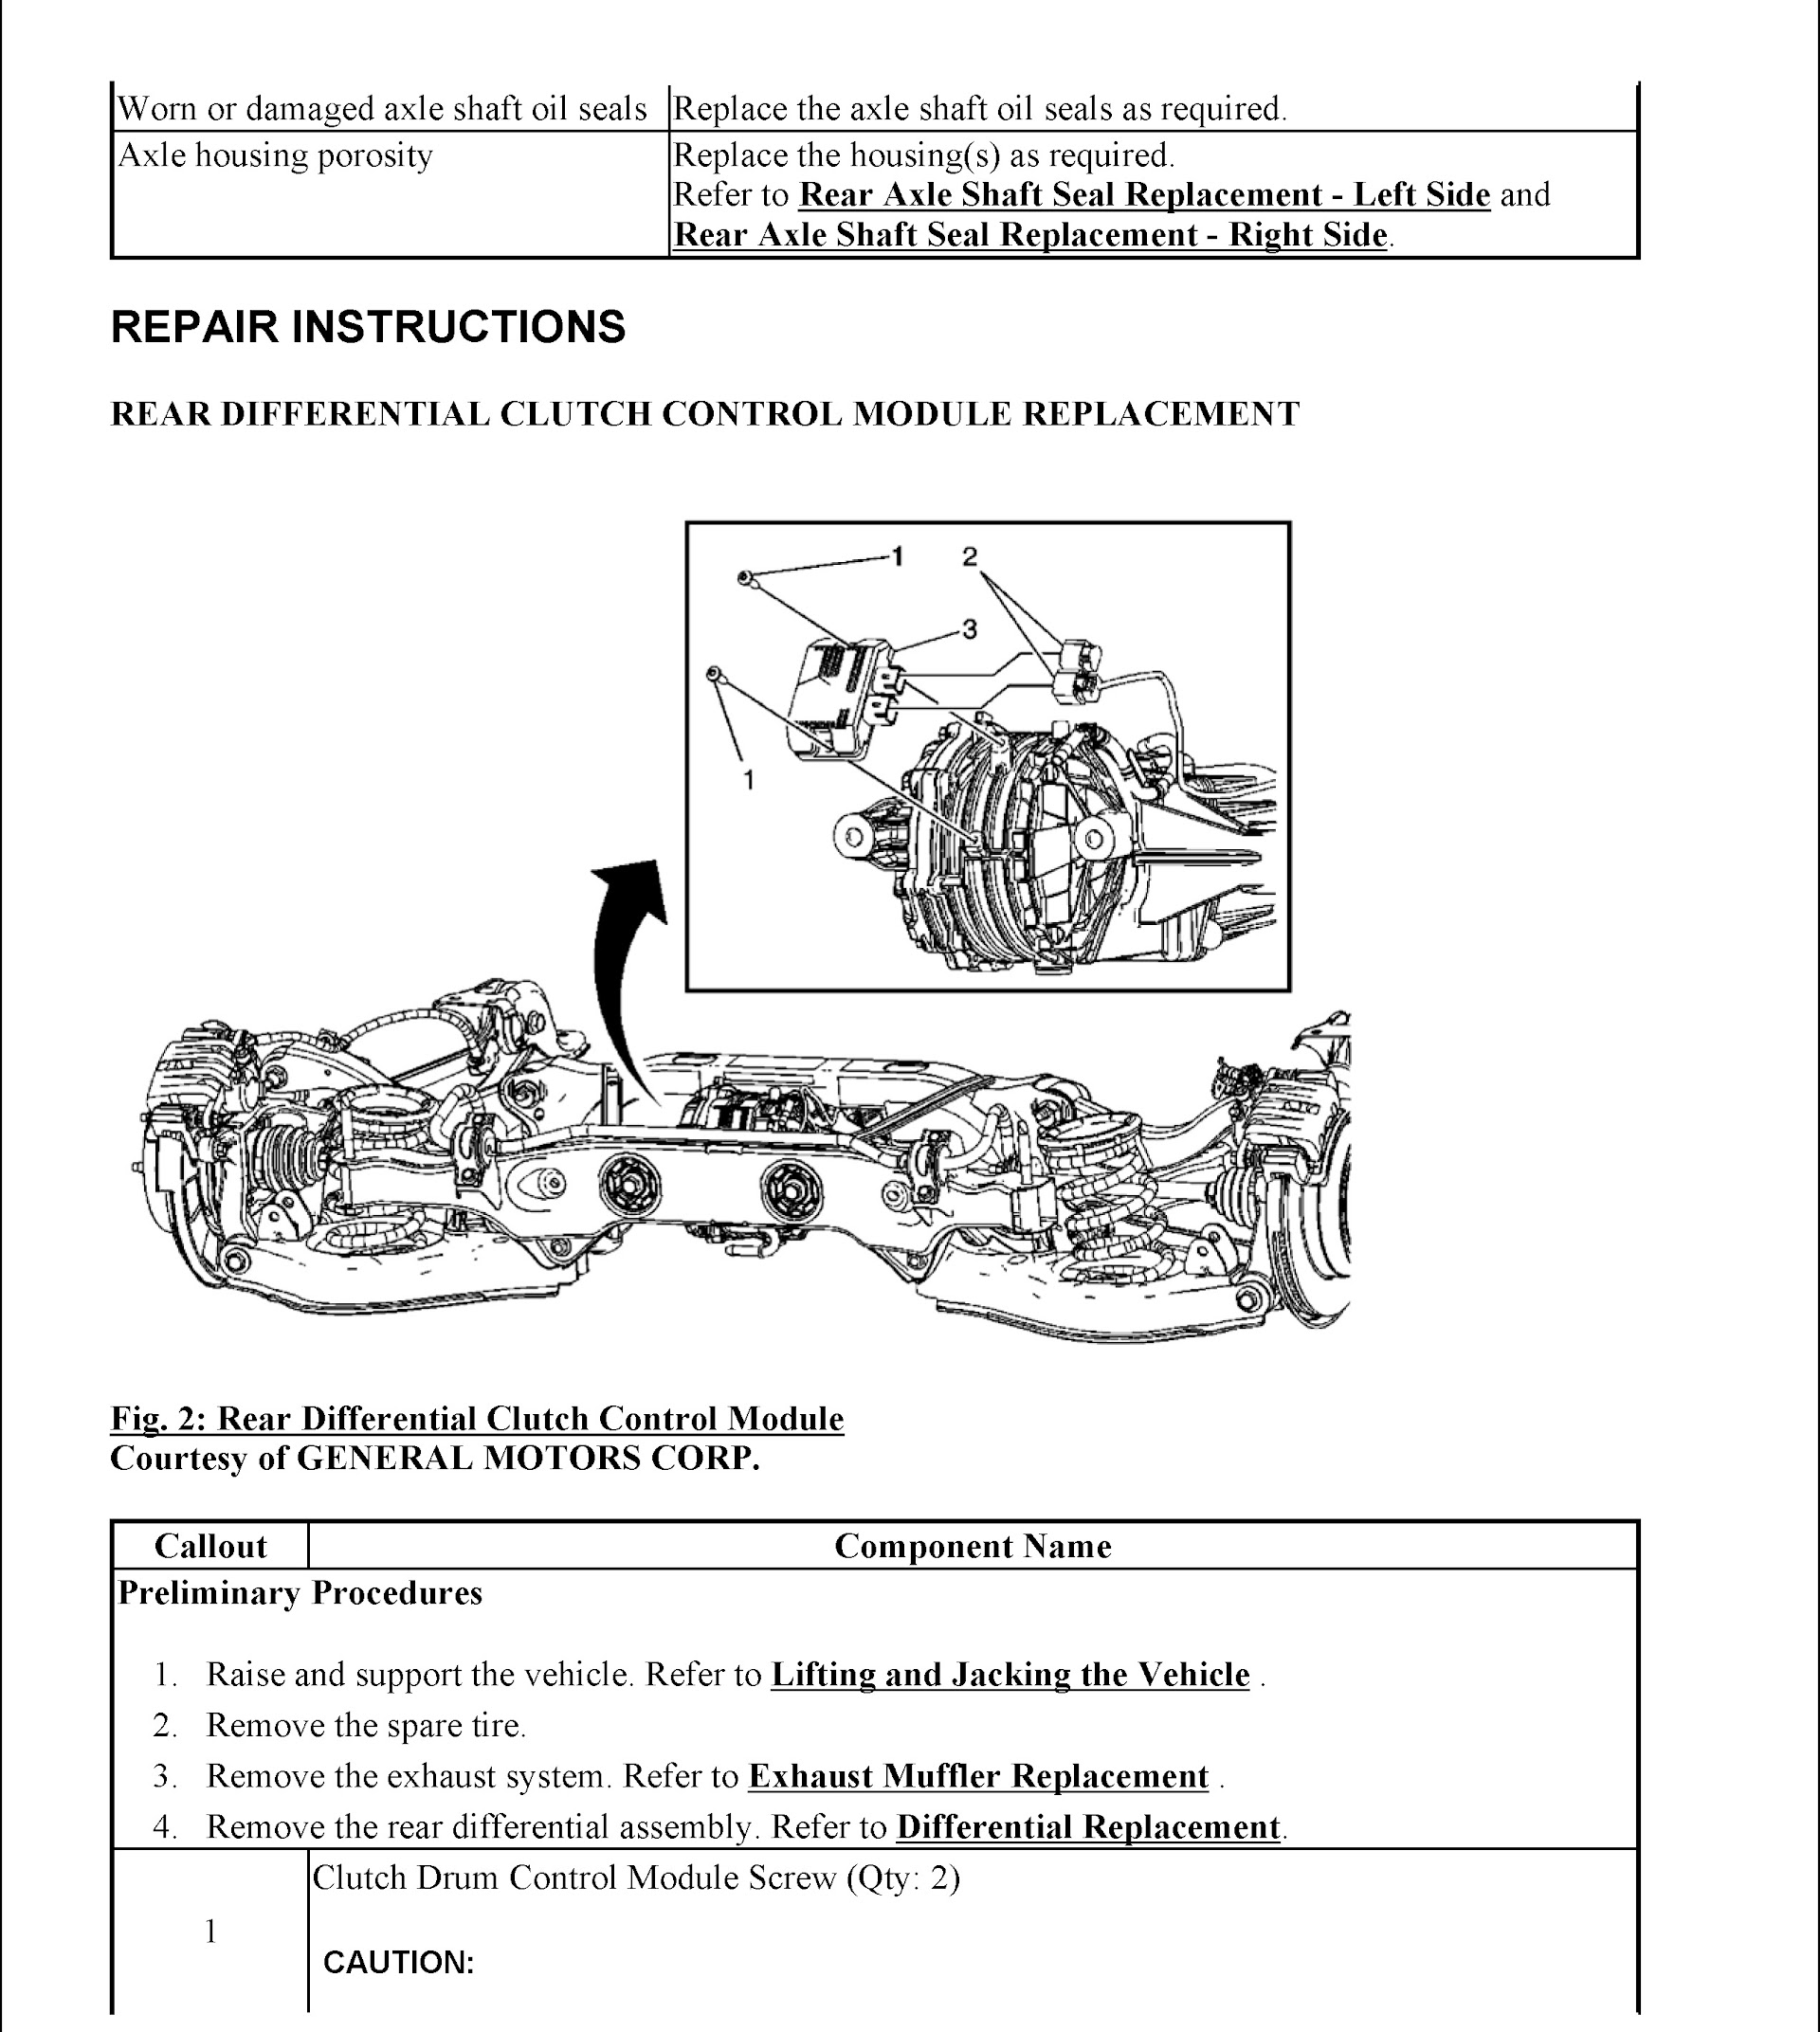 CONTENTS: 2010-2012 Chevrolet Equinox Repair Manual and GMC Terrain, Rear Differential Clutch Control Module Replacement